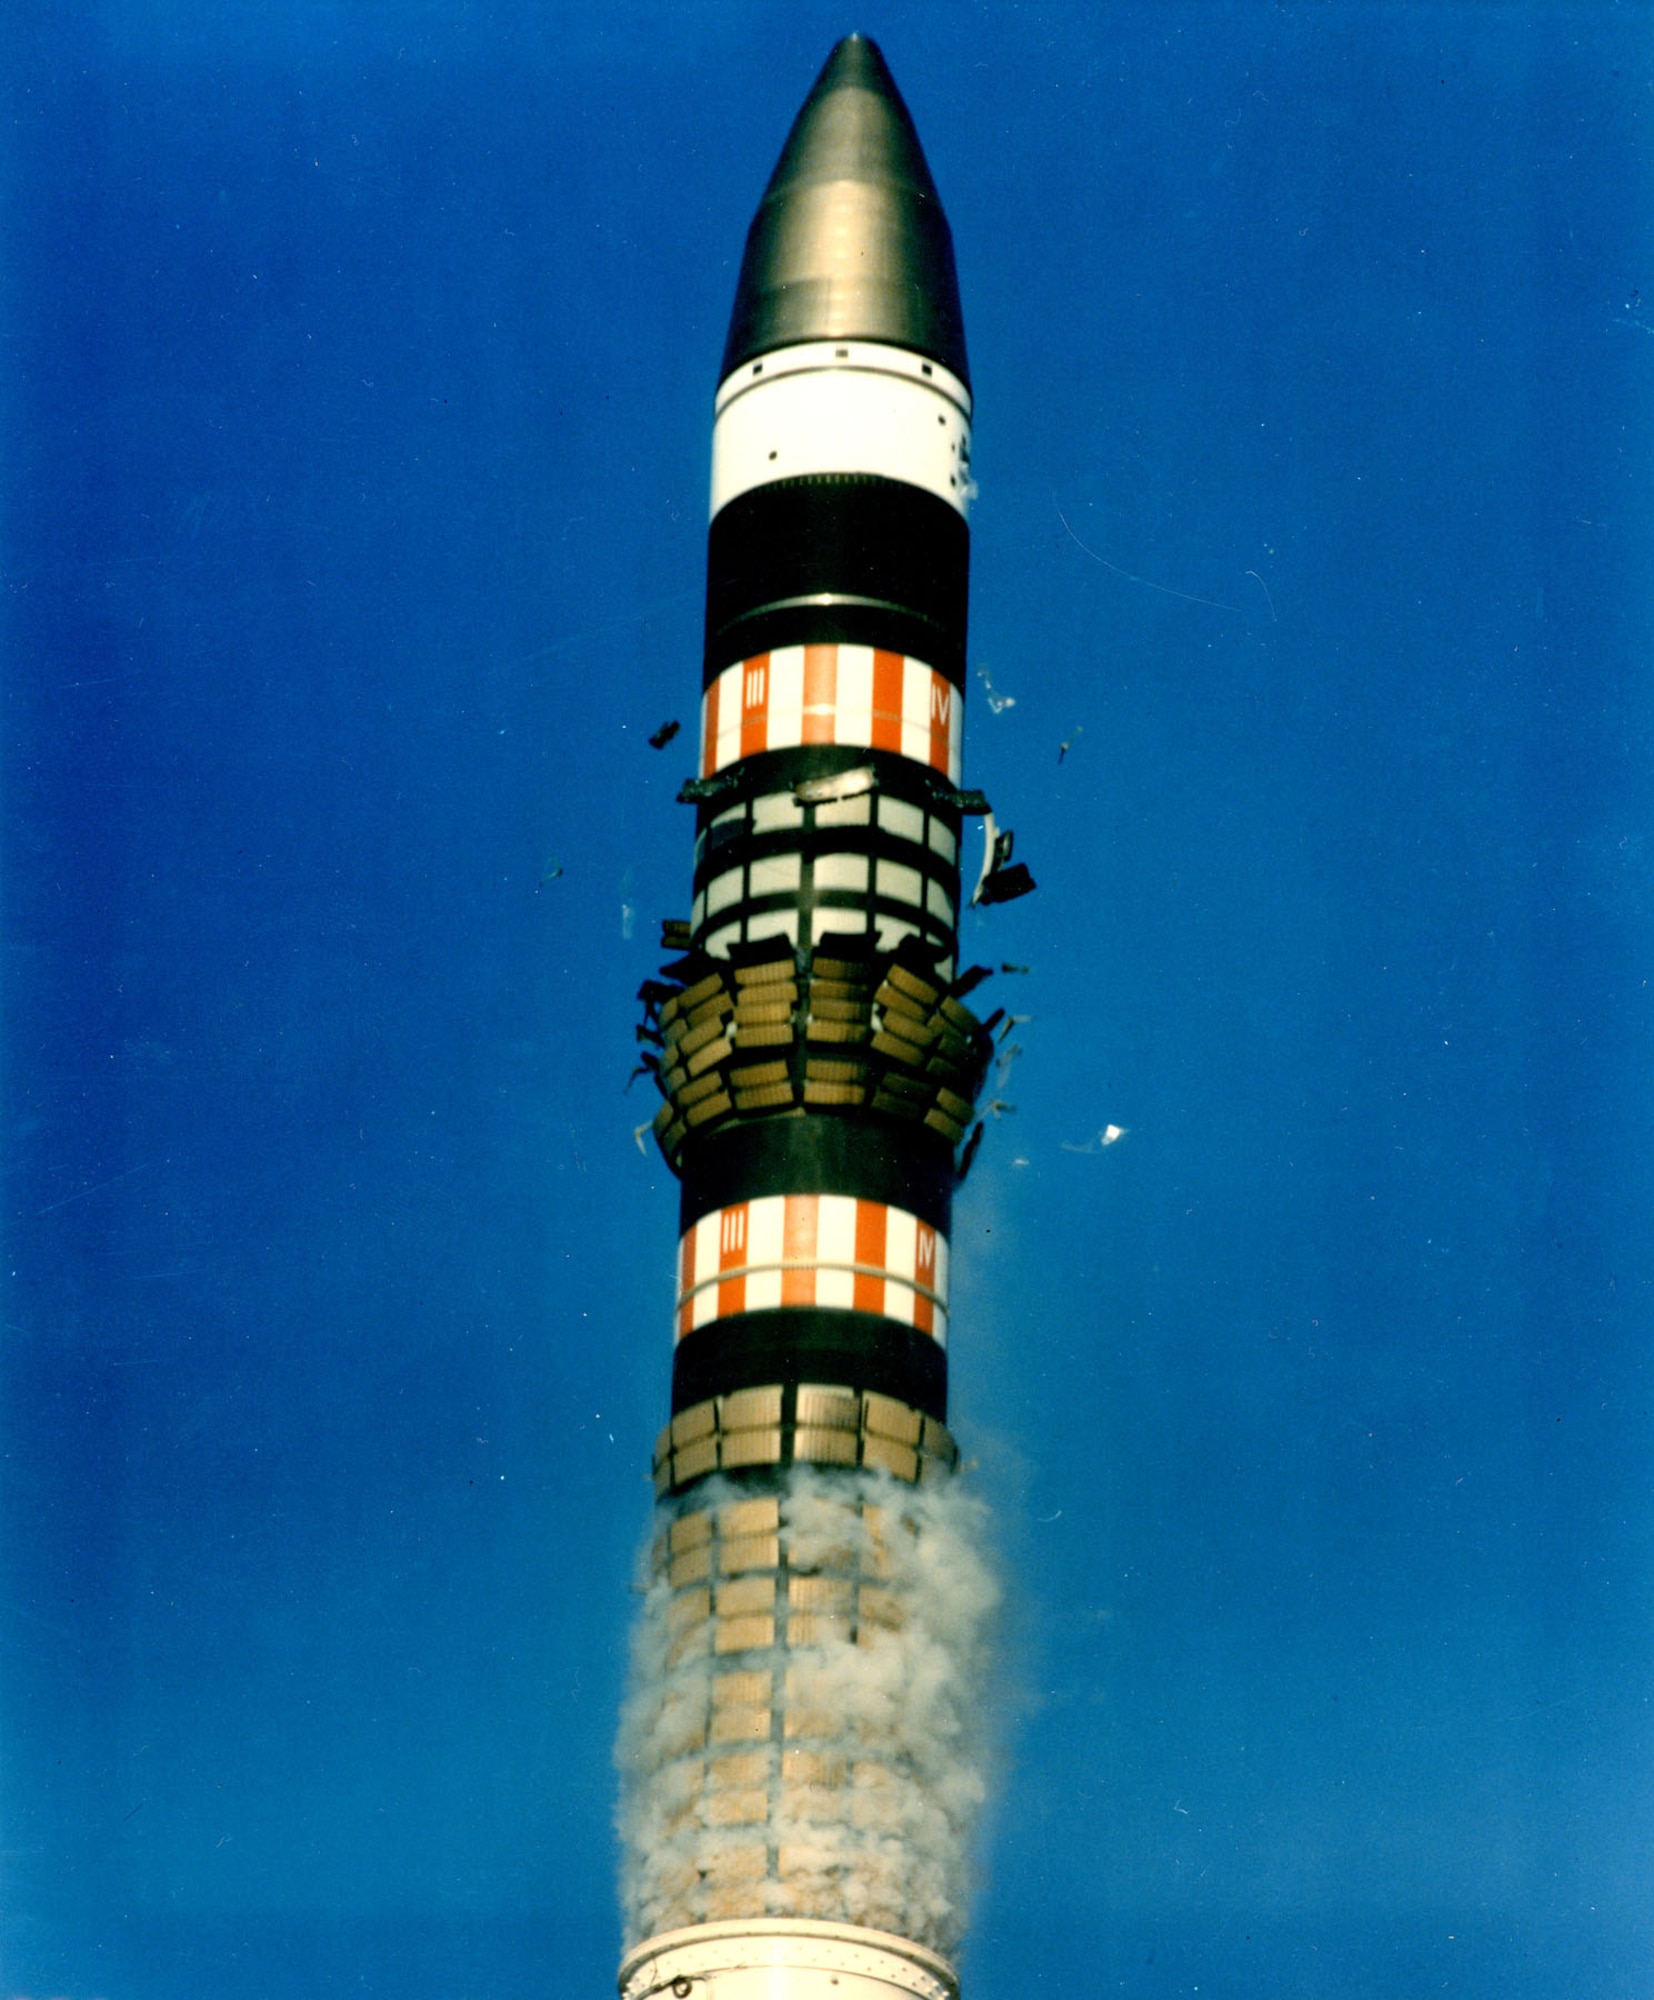 Shock-absorbing tiles, which help the missile exit its canister, fall away as Peacekeeper is launched. (U.S. Air Force photo)